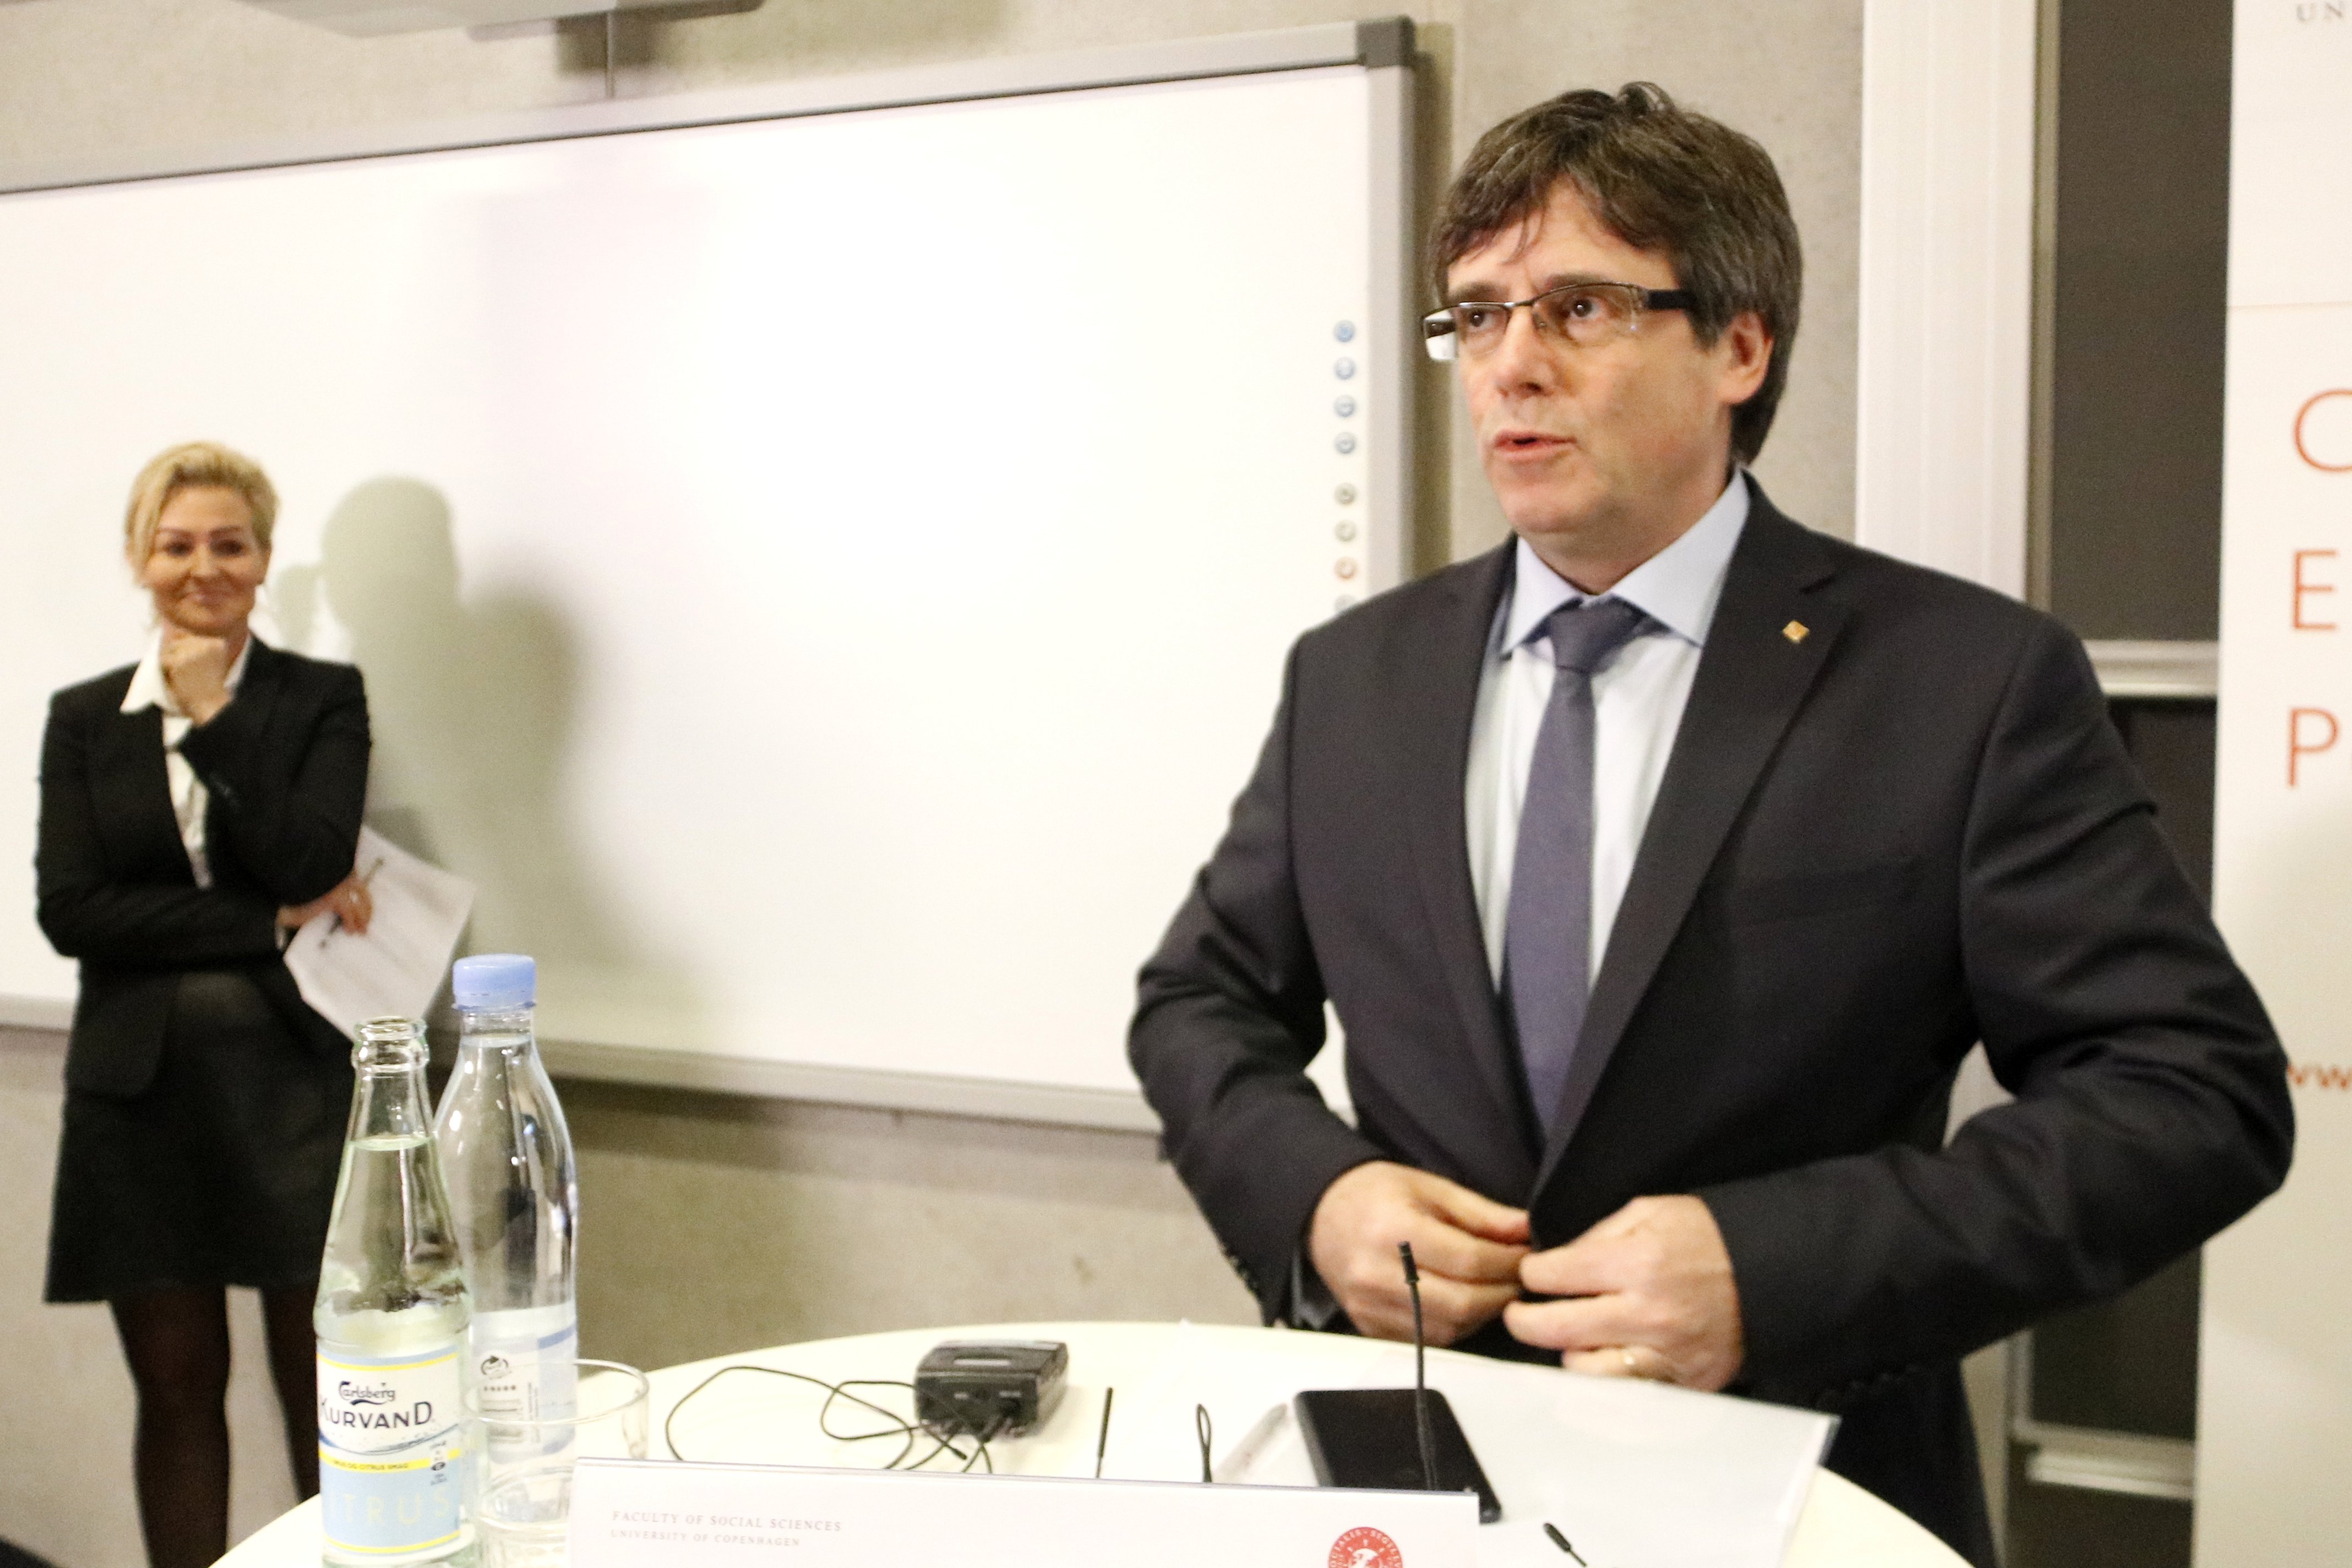 Puigdemont calls for an agreement to implement the Catalan republic